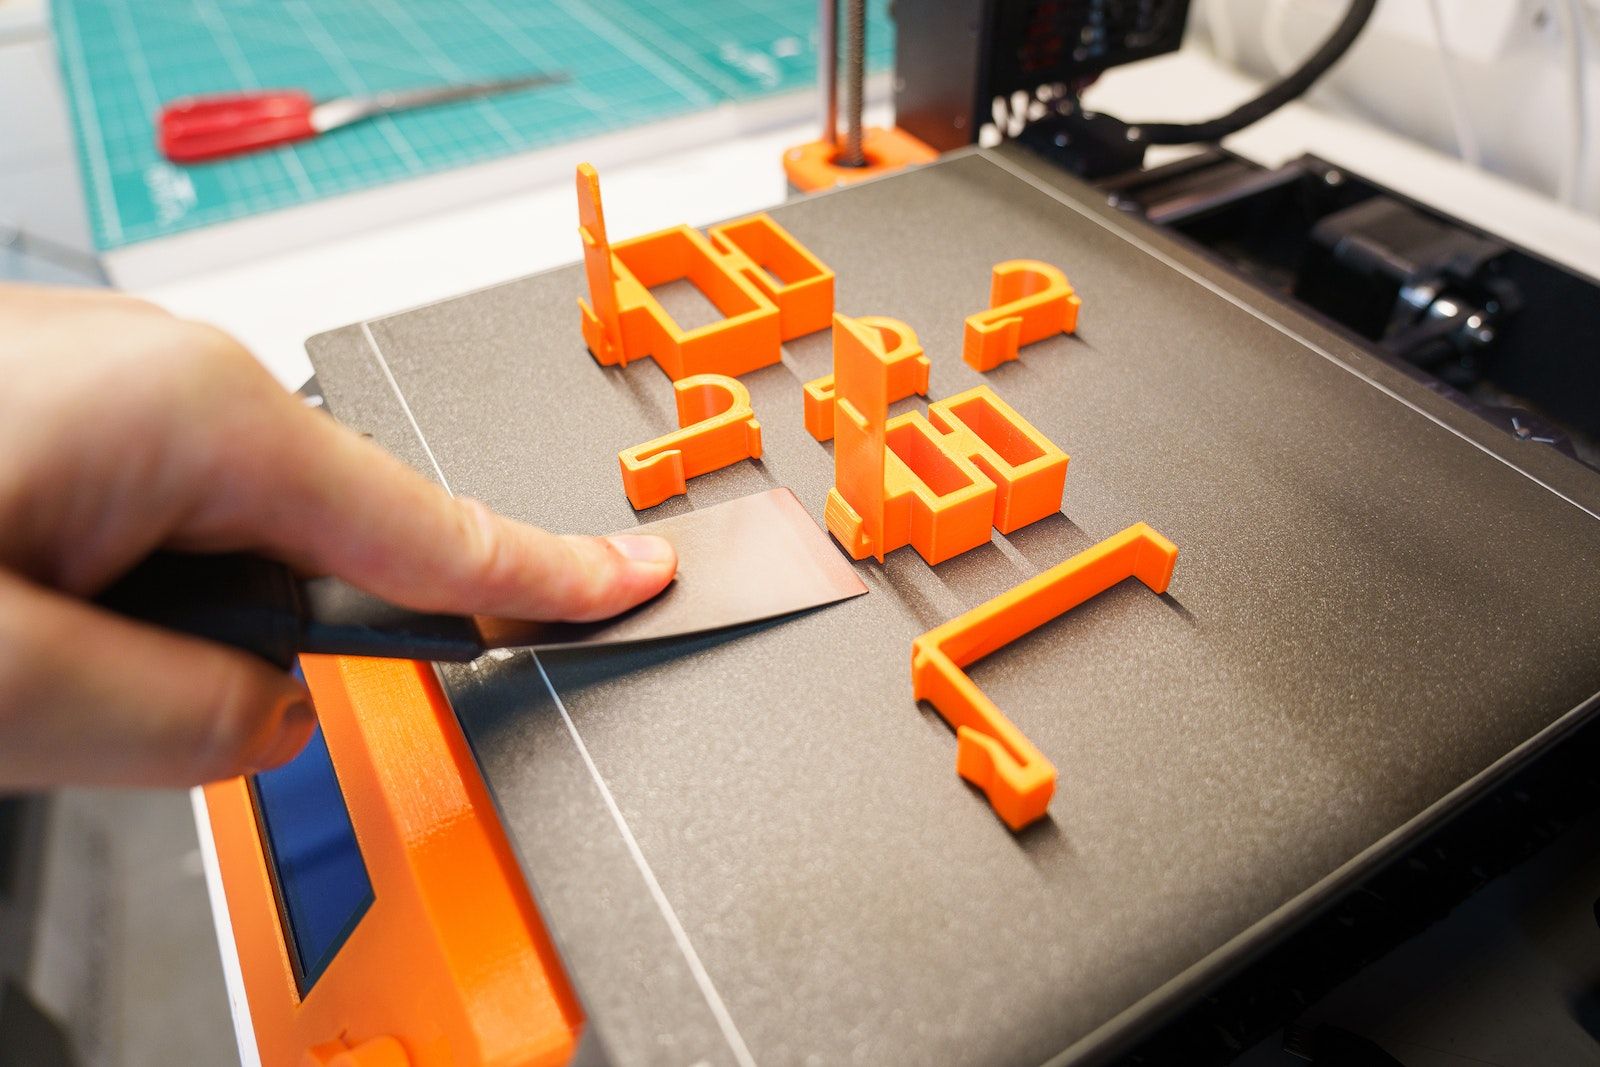 Best 3D printer: Our pick of the best FDM and resin printers to suit every need